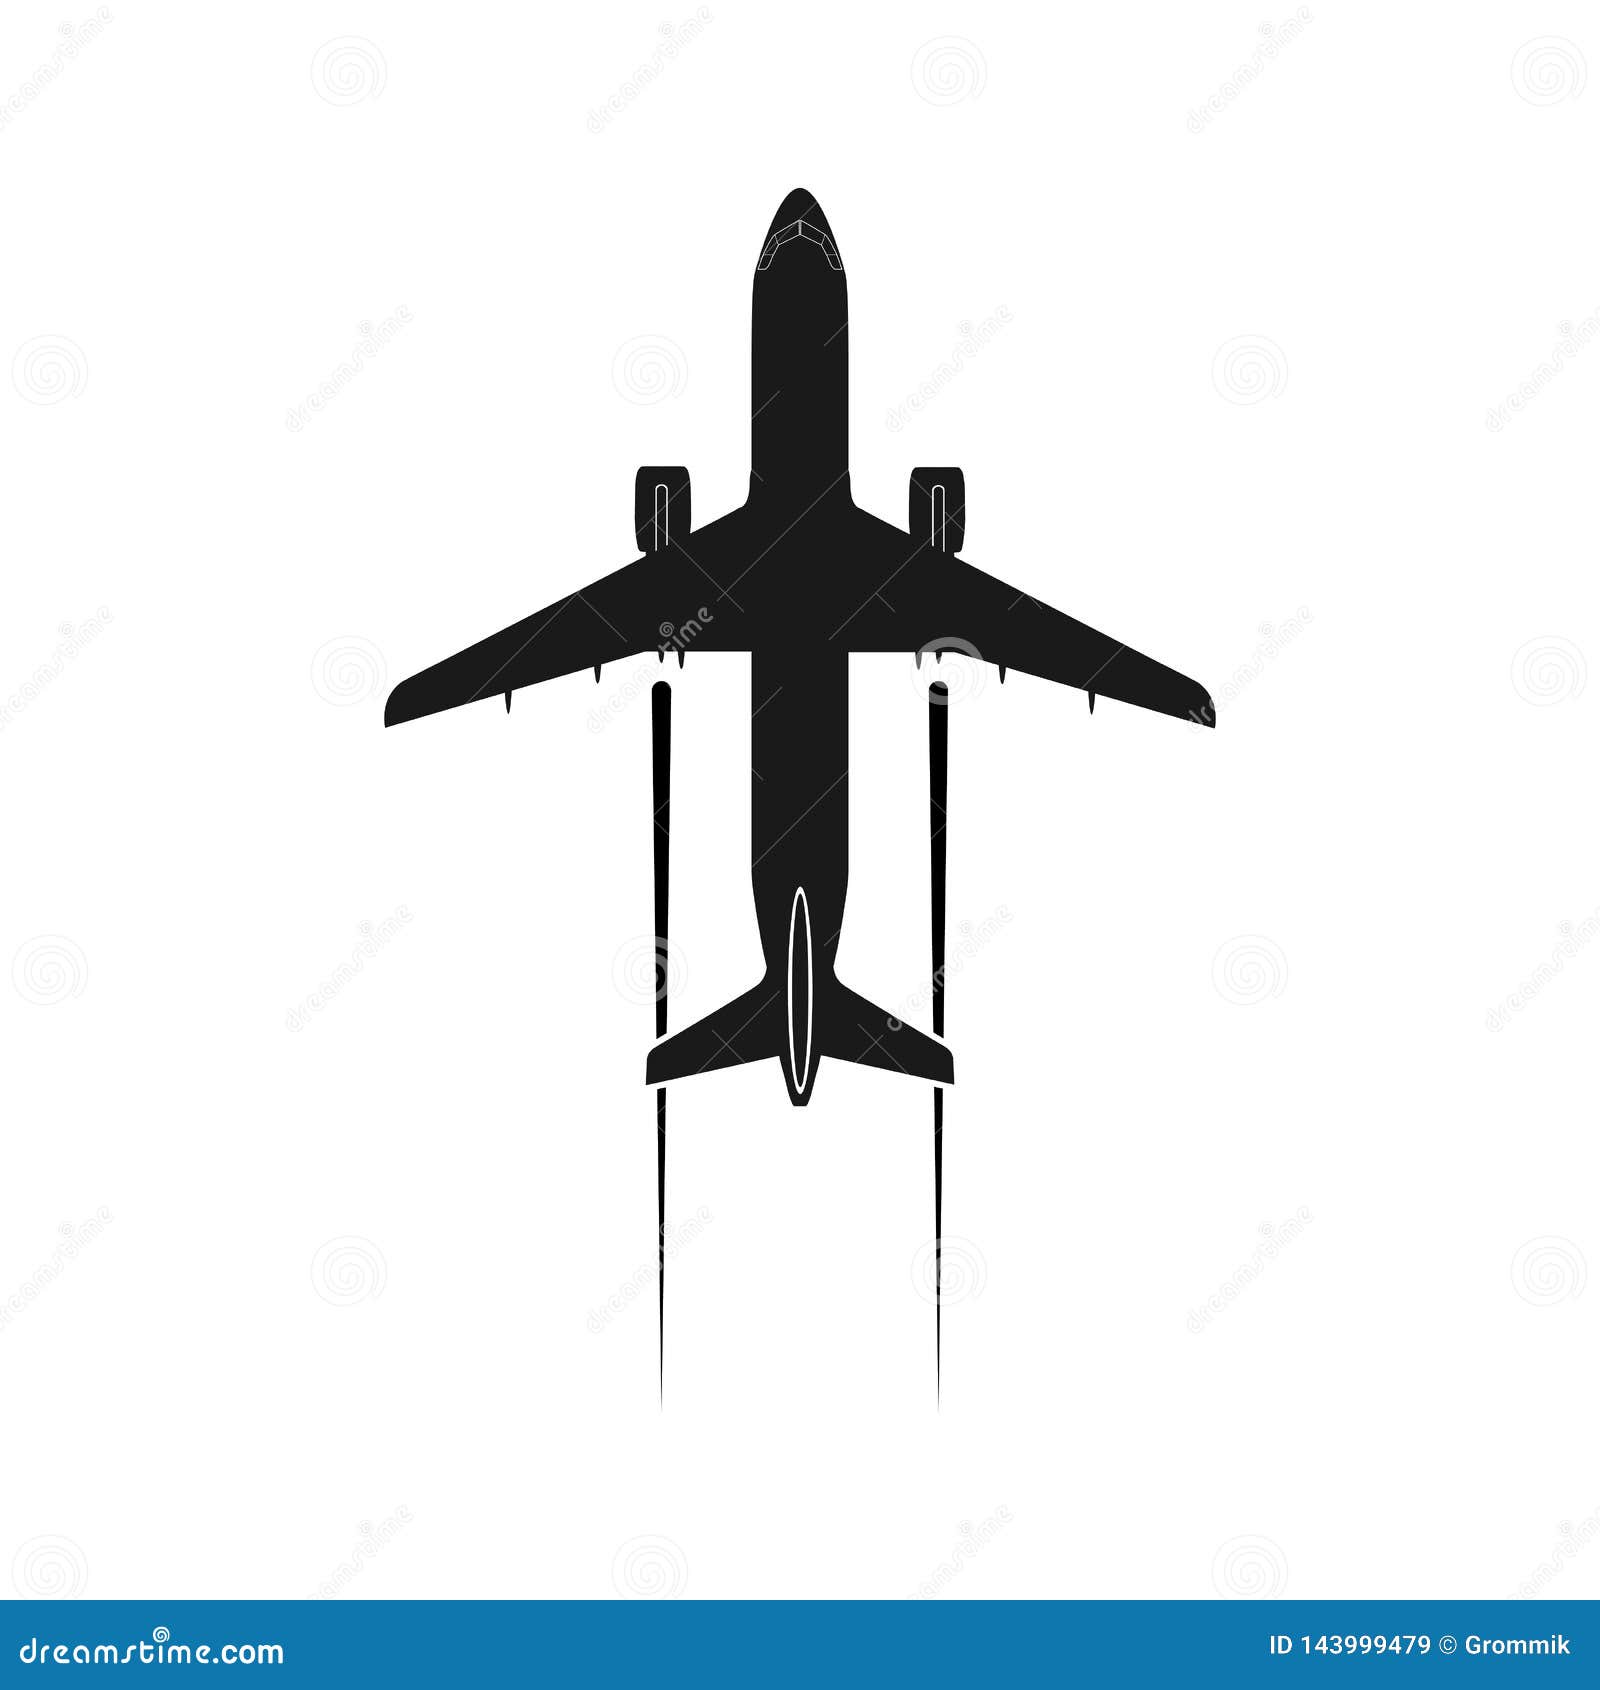 Aeroplane Drawing Tips and Techniques for Beginners